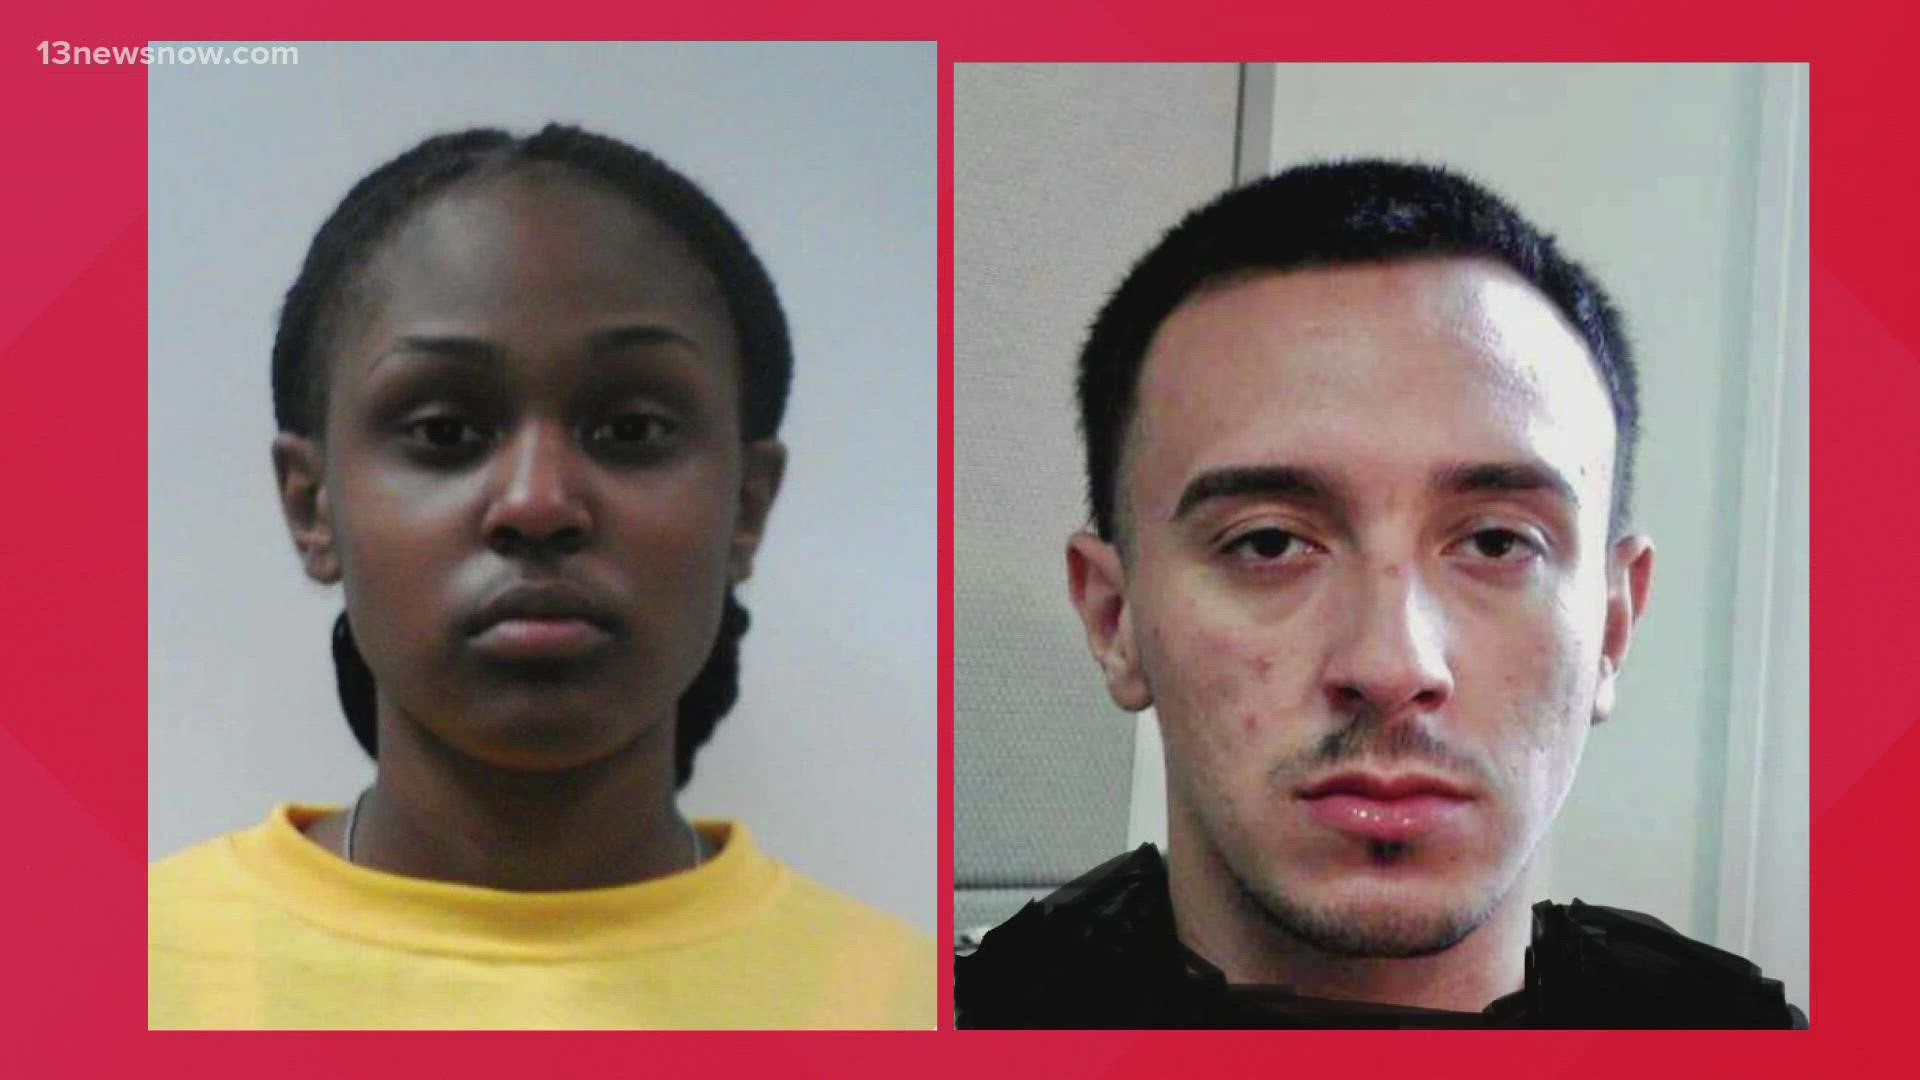 Police say 19-year-old Khyla Wilson and 22-year-old Dominic Cravins-Hernandez were last seen in Portsmouth on Monday.